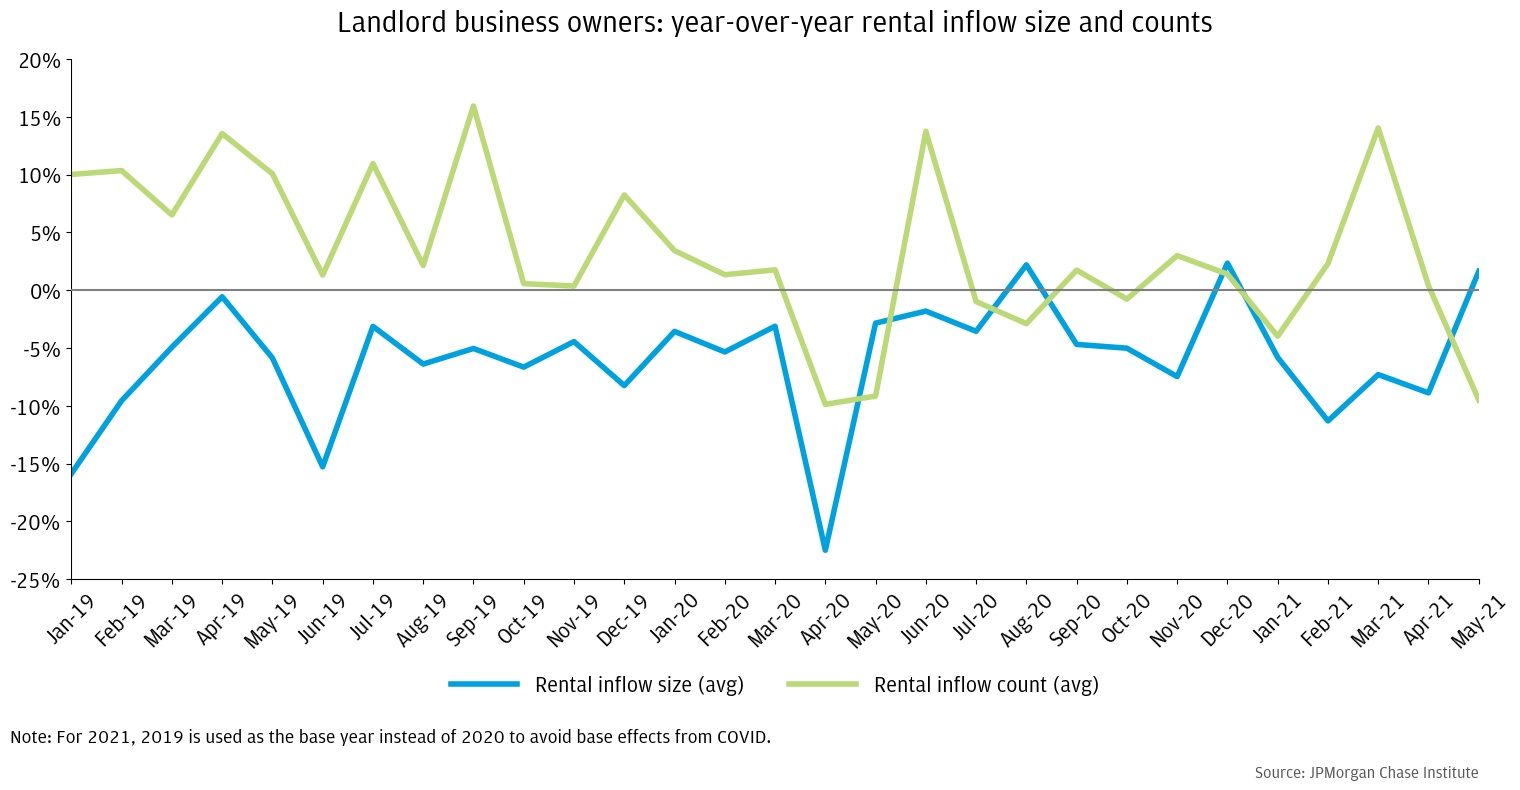 : : Both the size and the number of rental inflows dropped